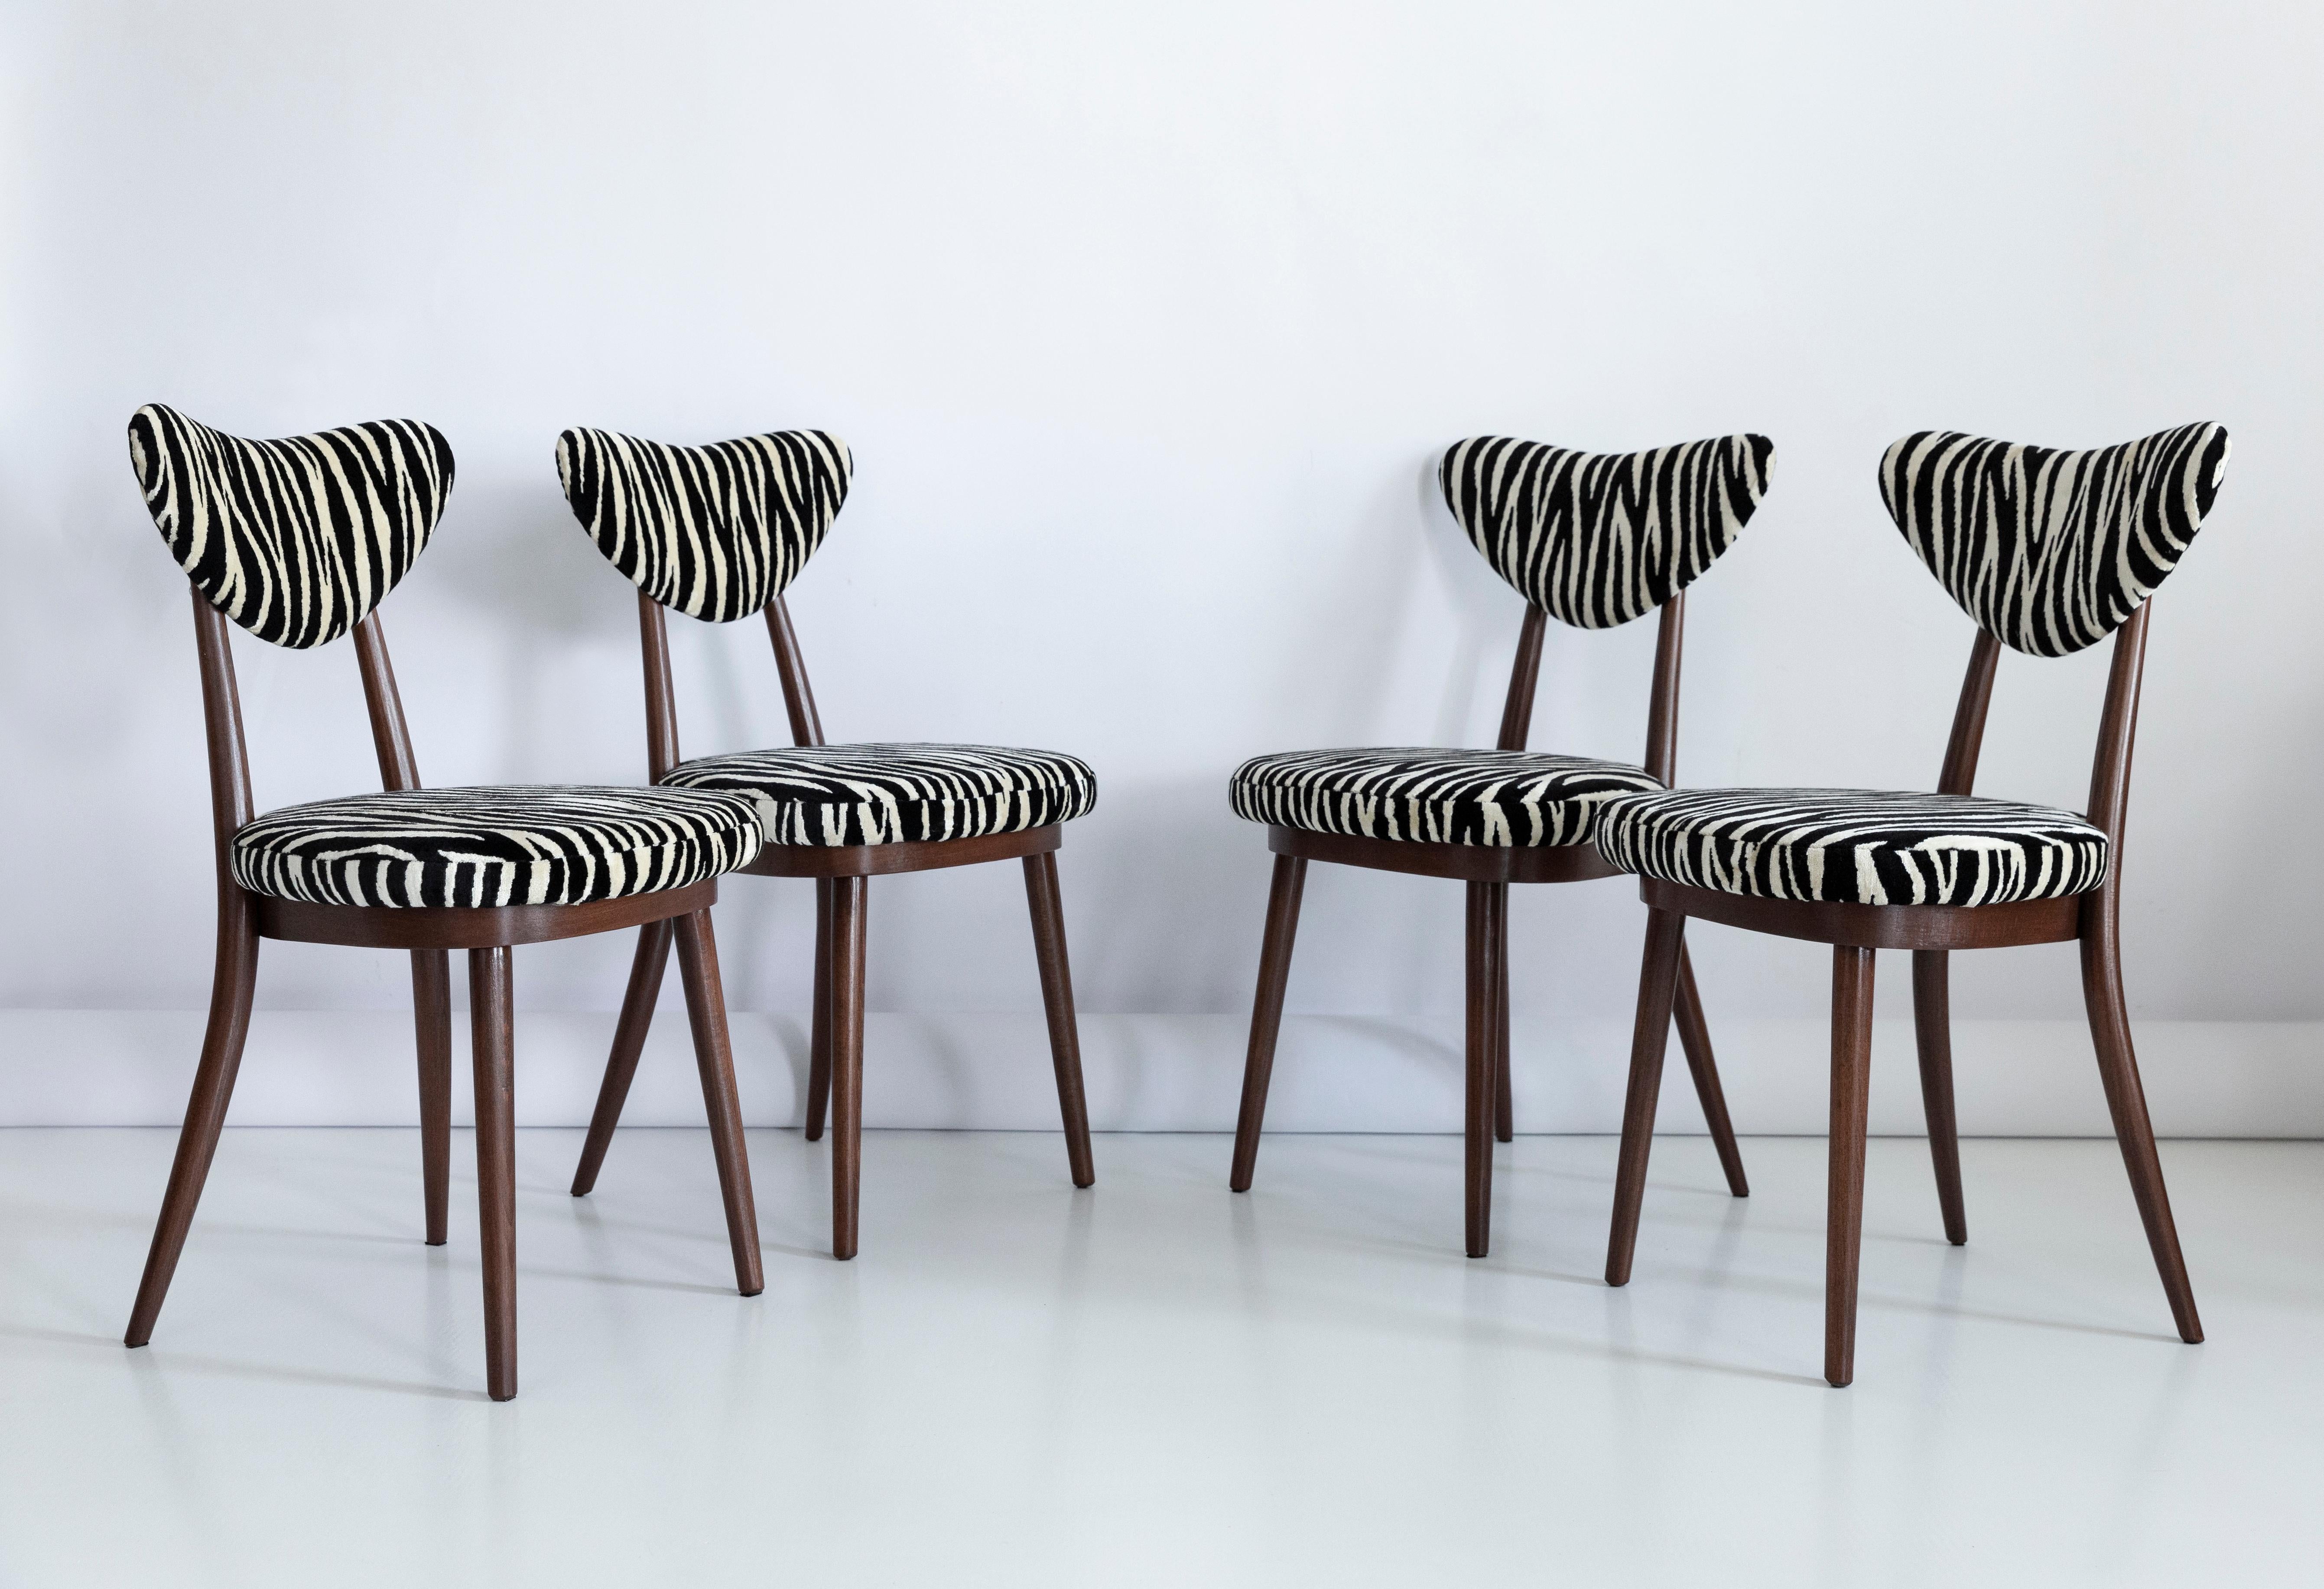 Polish Set of Six Midcentury Zebra Black and White Heart Chairs, Poland, 1960s For Sale